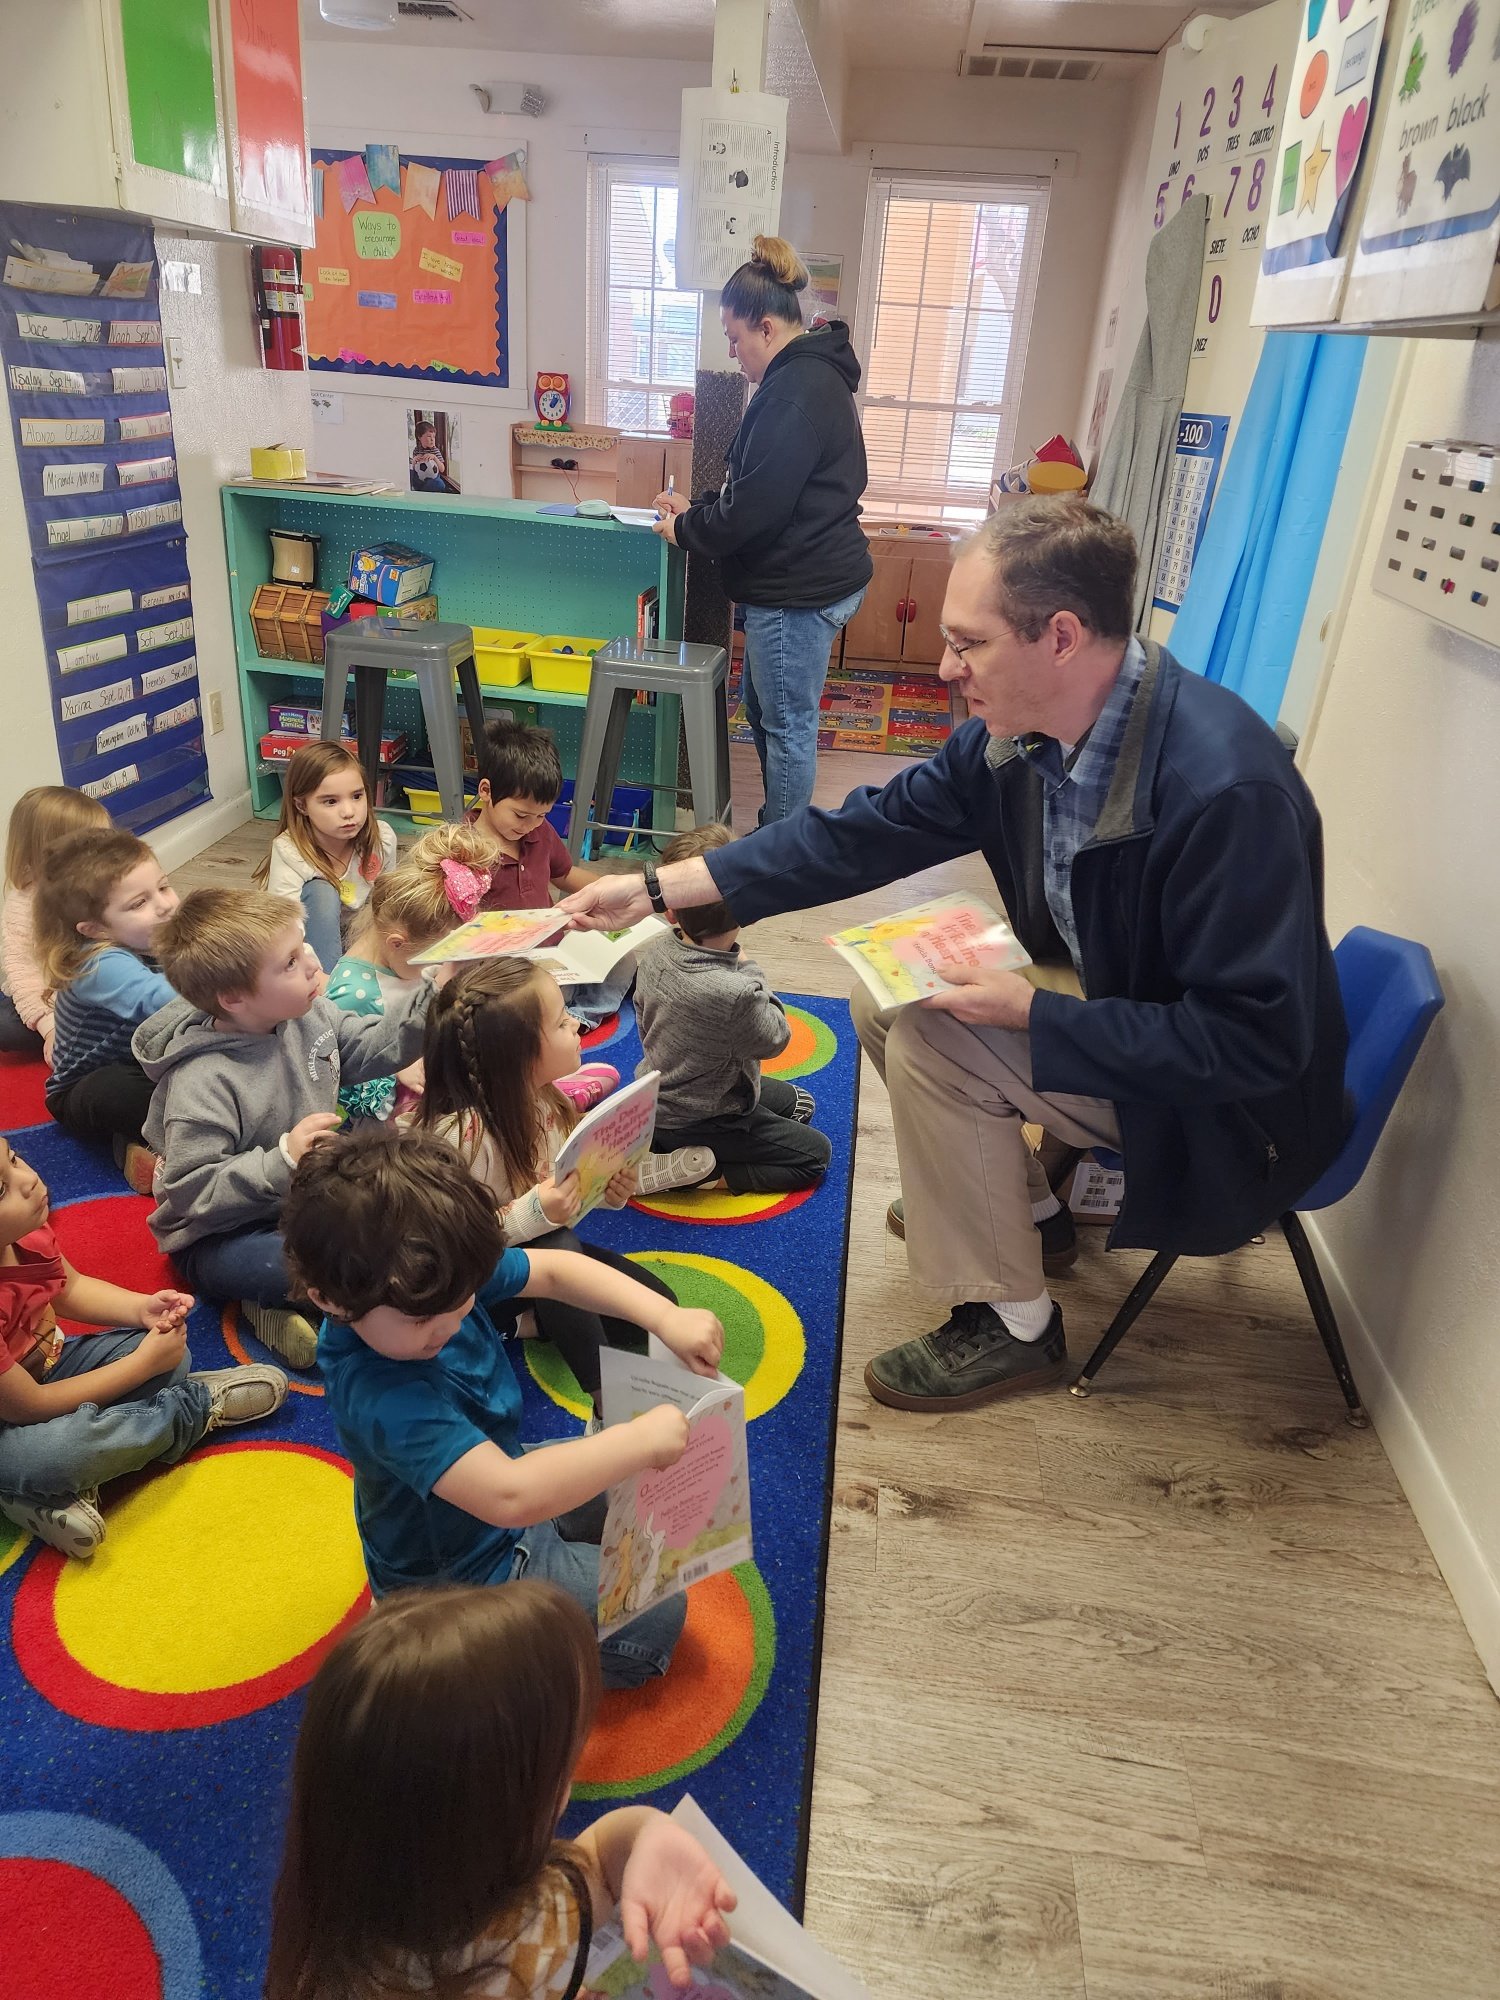  Ms. Beeson, Mangum School Supervisor reported, "Joseph from the Margaret Carder Library came to read the book "The Day it Rained Hearts" and to give each kid a book to take home."  Head Start loves the Library! 